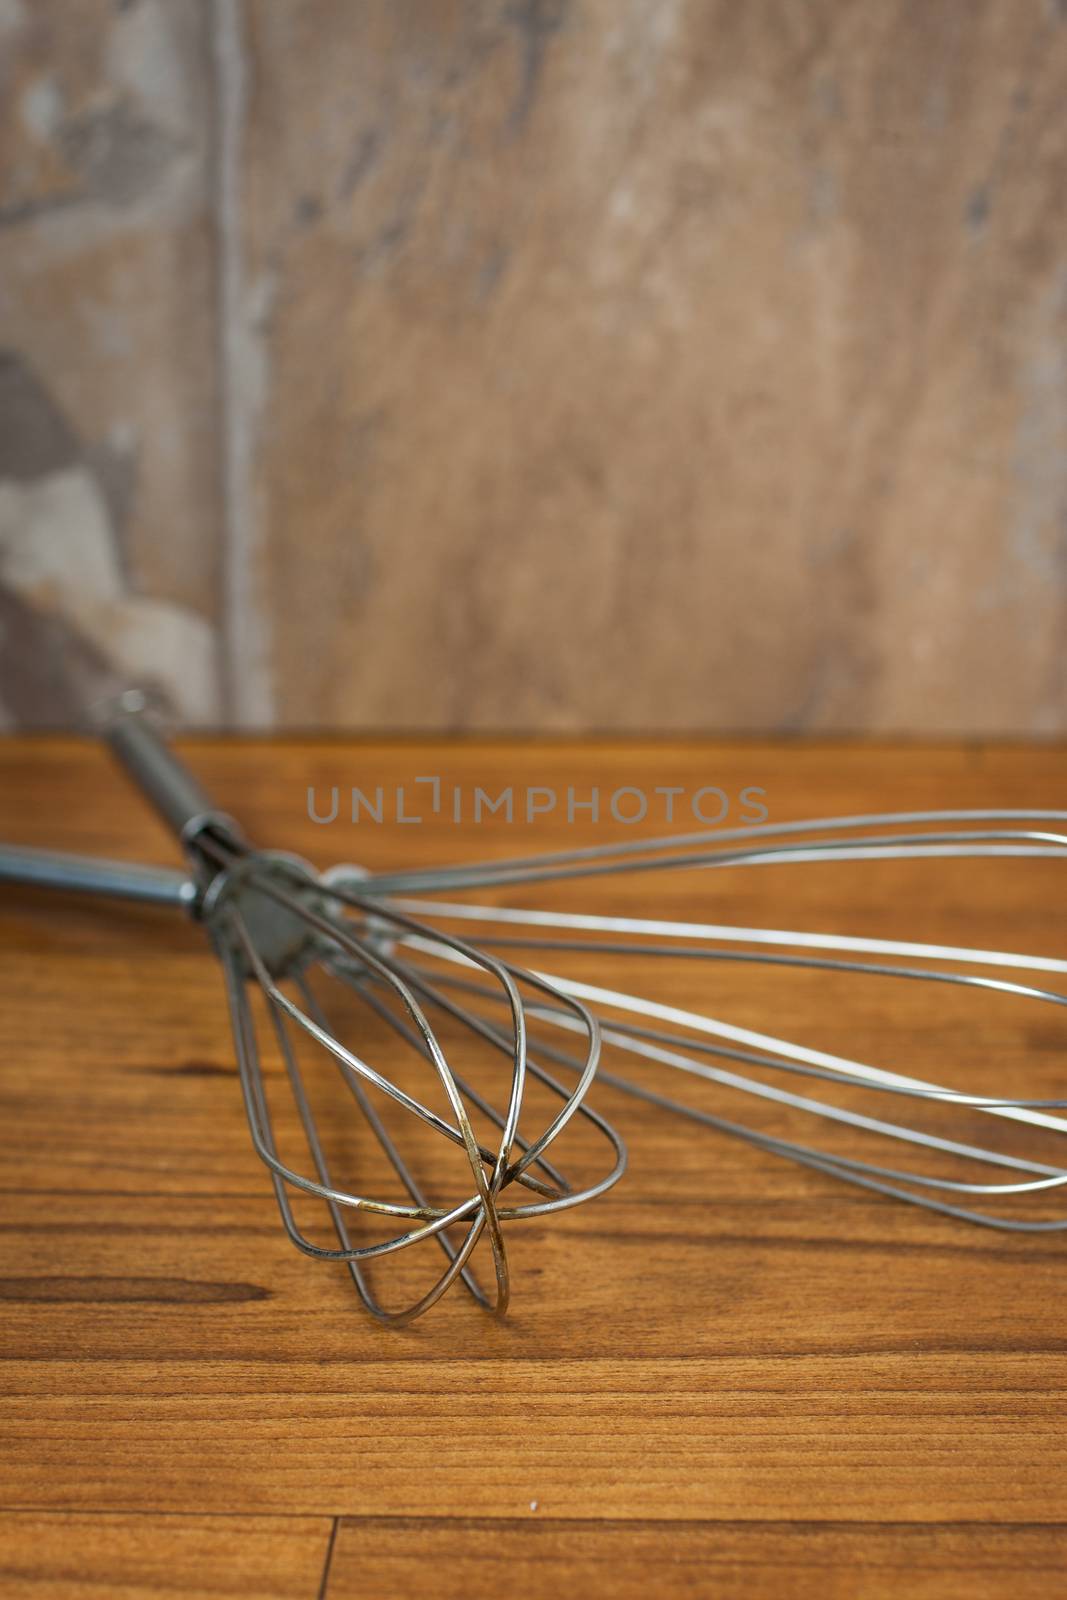 Well used metal wisks lay on a wooden counter.